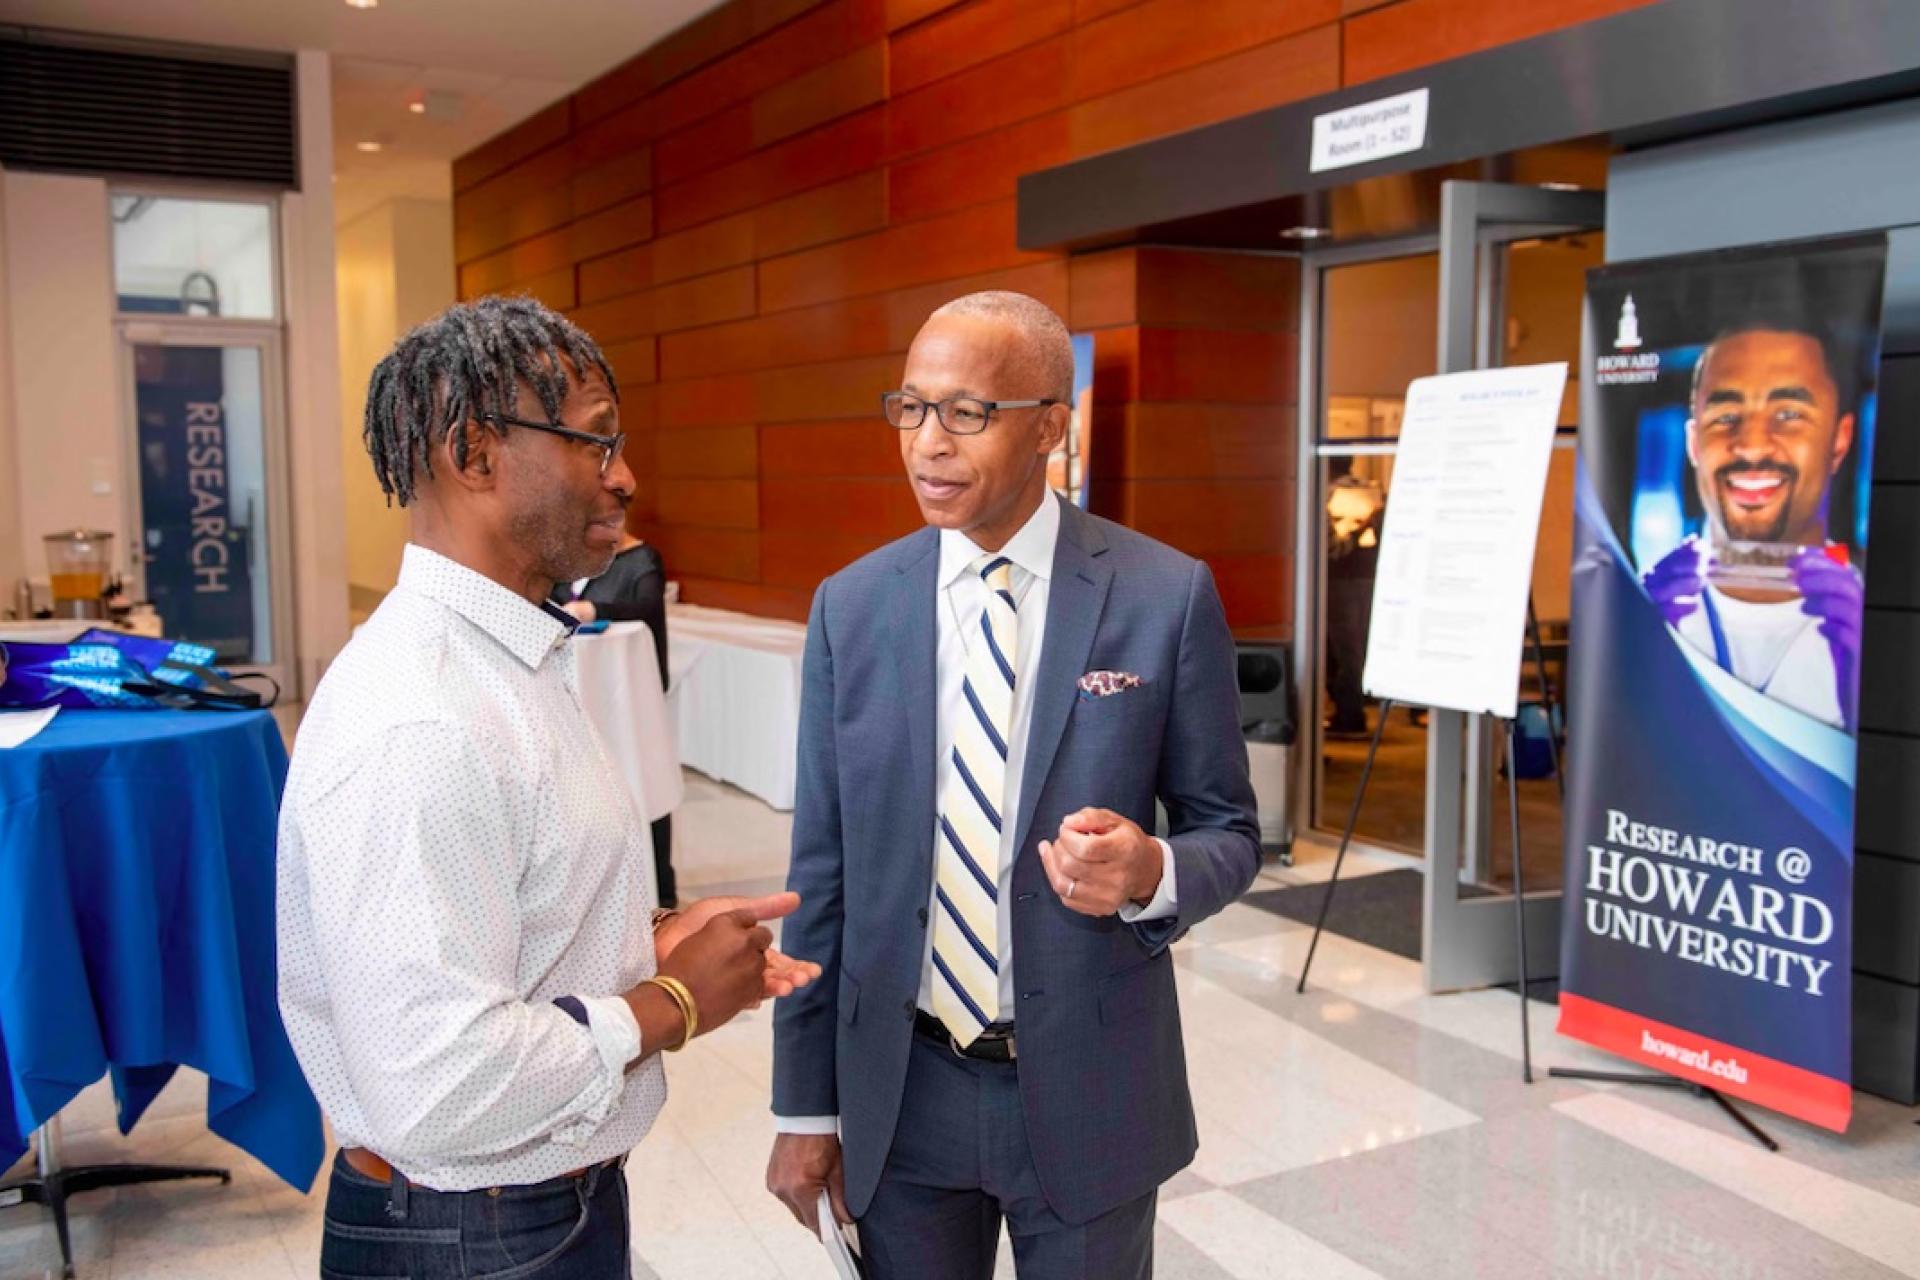 Howard VP of Research chats with student